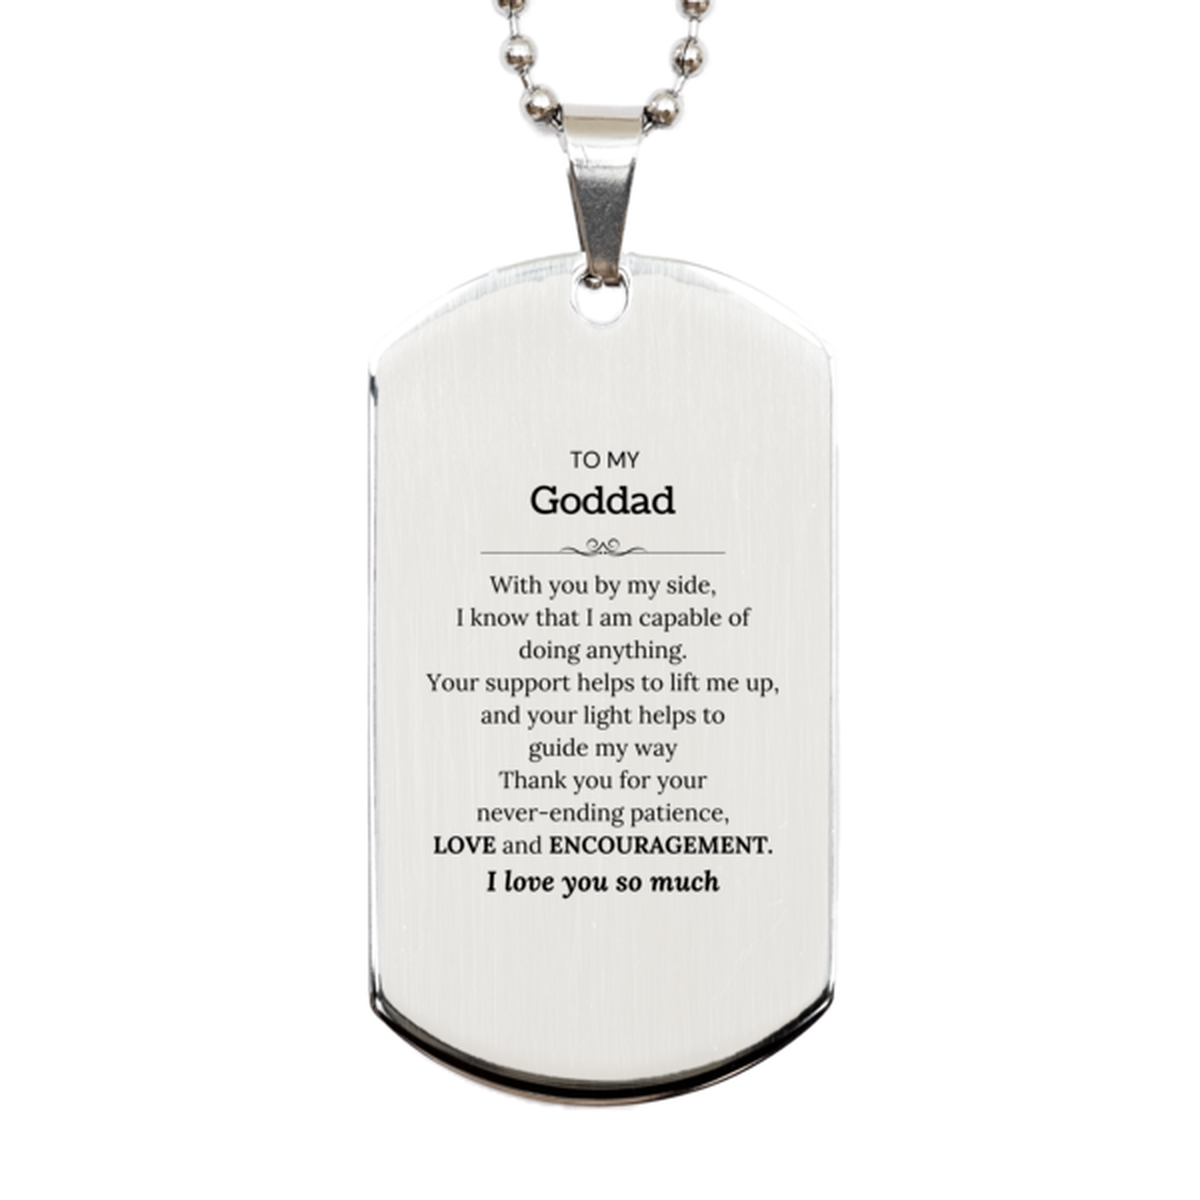 Appreciation Goddad Silver Dog Tag Gifts, To My Goddad Birthday Christmas Wedding Keepsake Gifts for Goddad With you by my side, I know that I am capable of doing anything. I love you so much